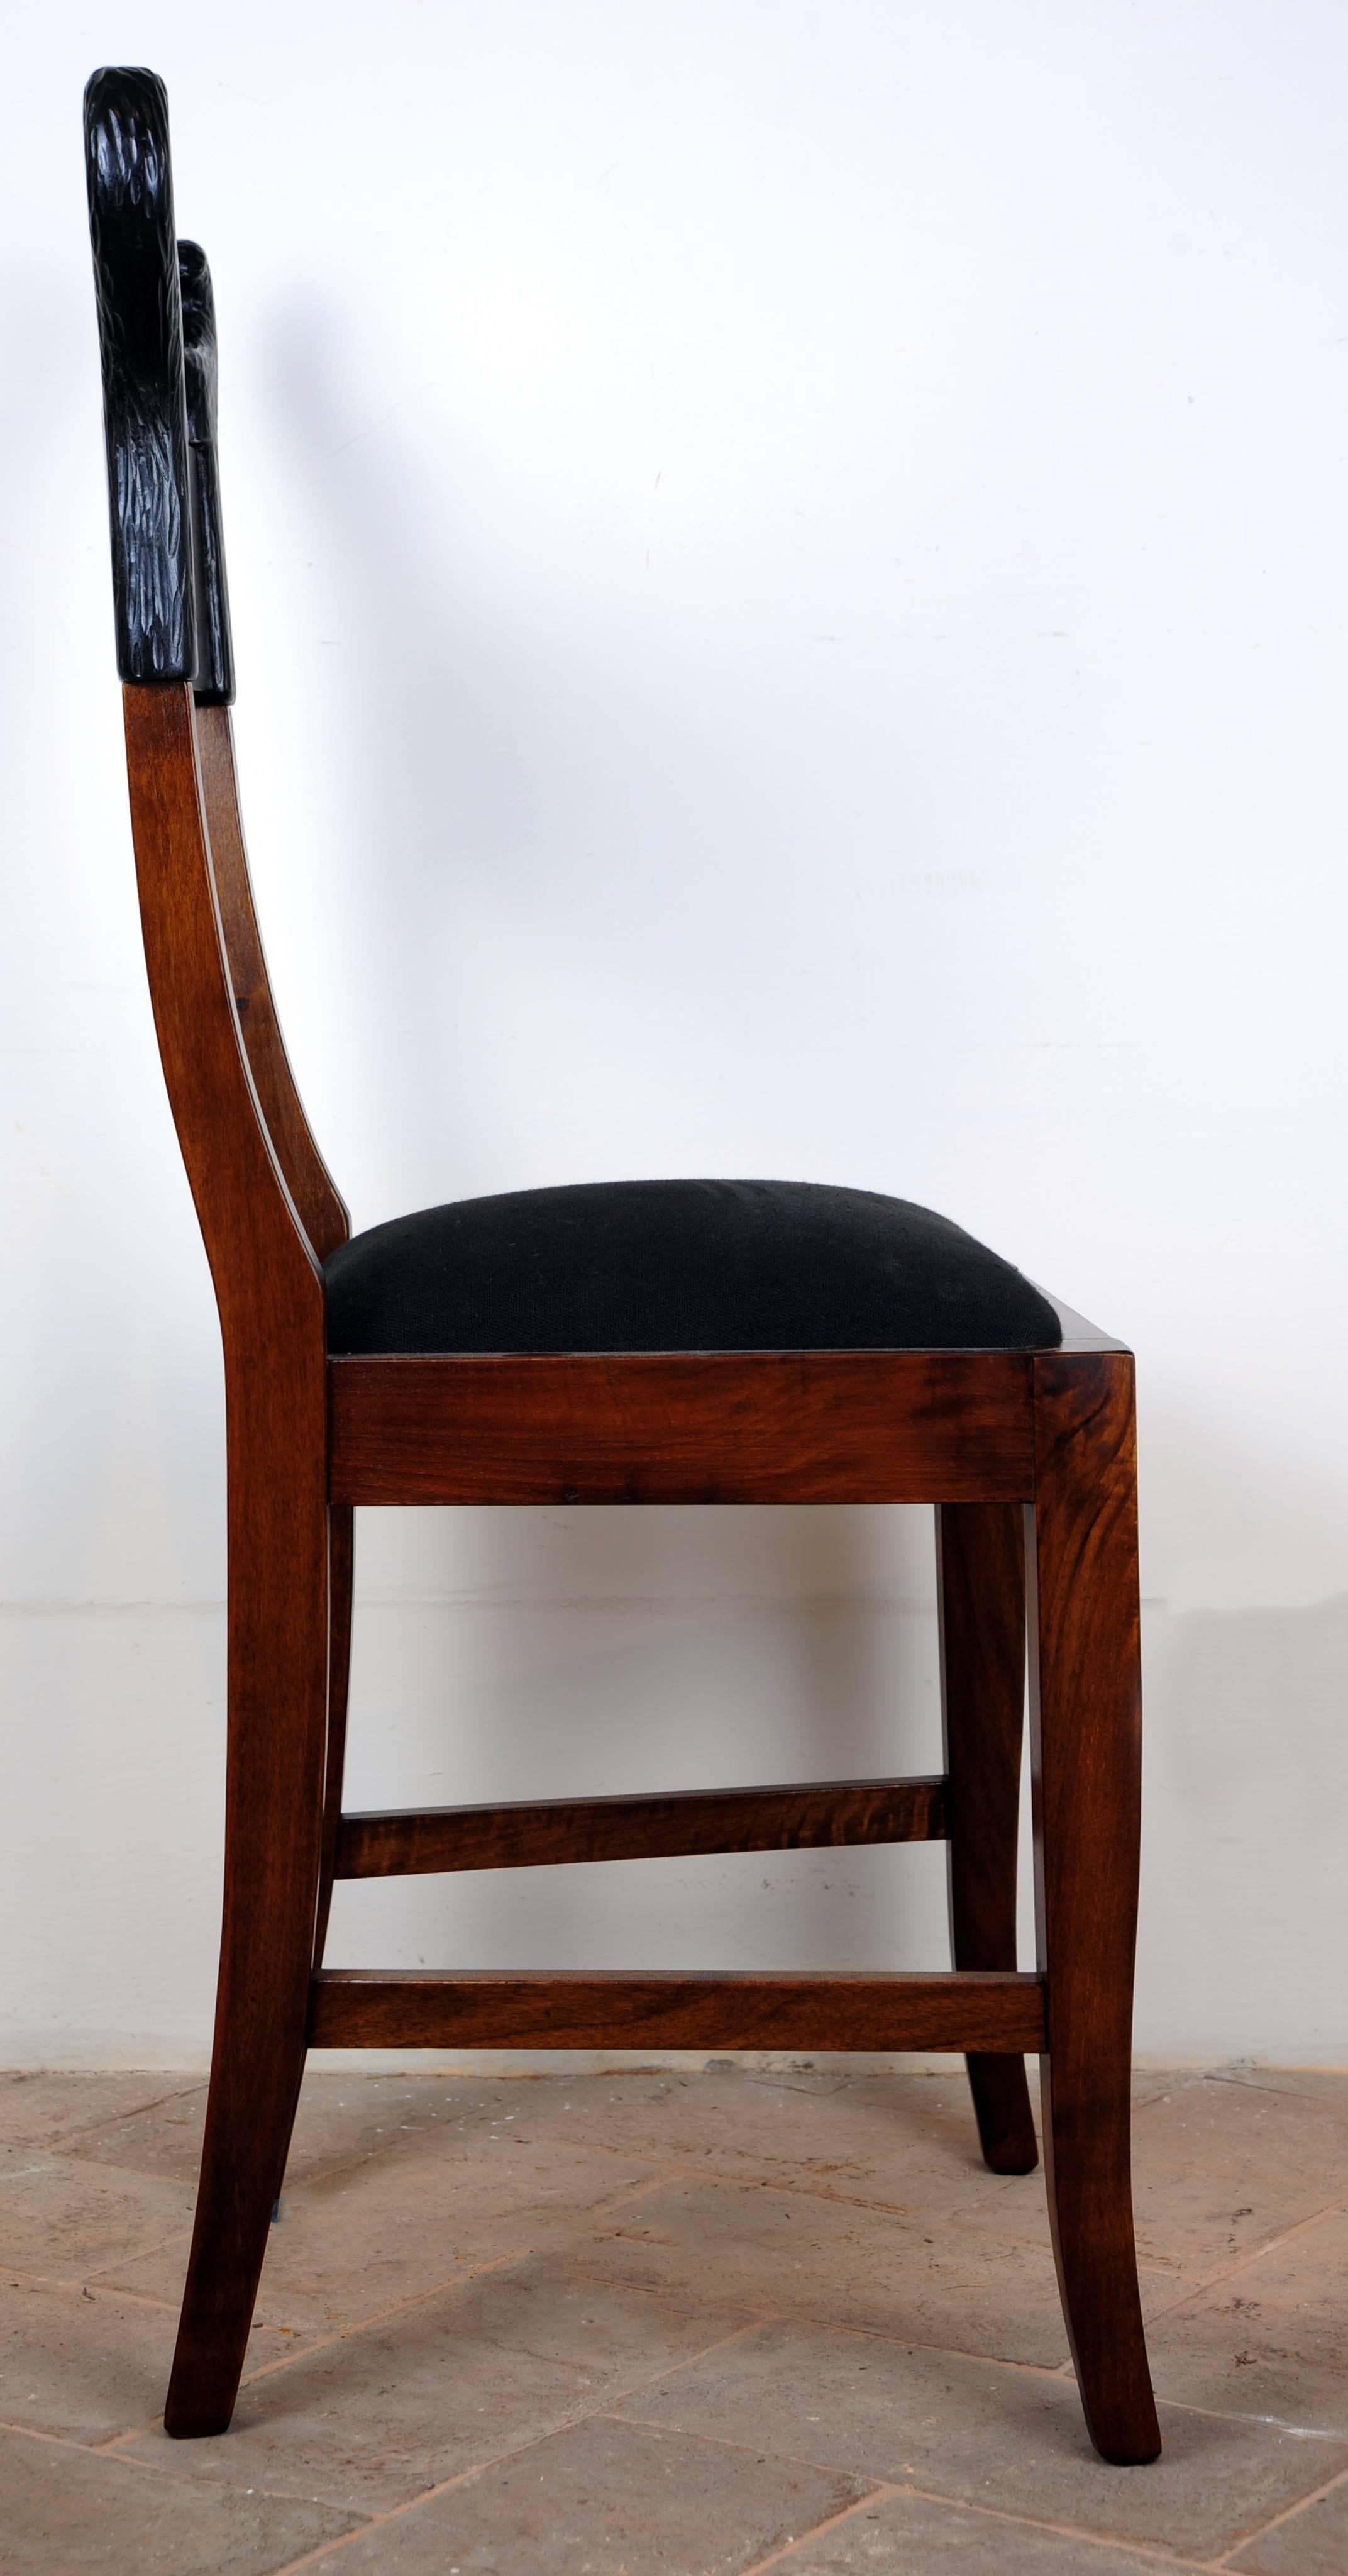 Italian Set of Four Black Forest Wood Chairs by Michelangeli, Italy